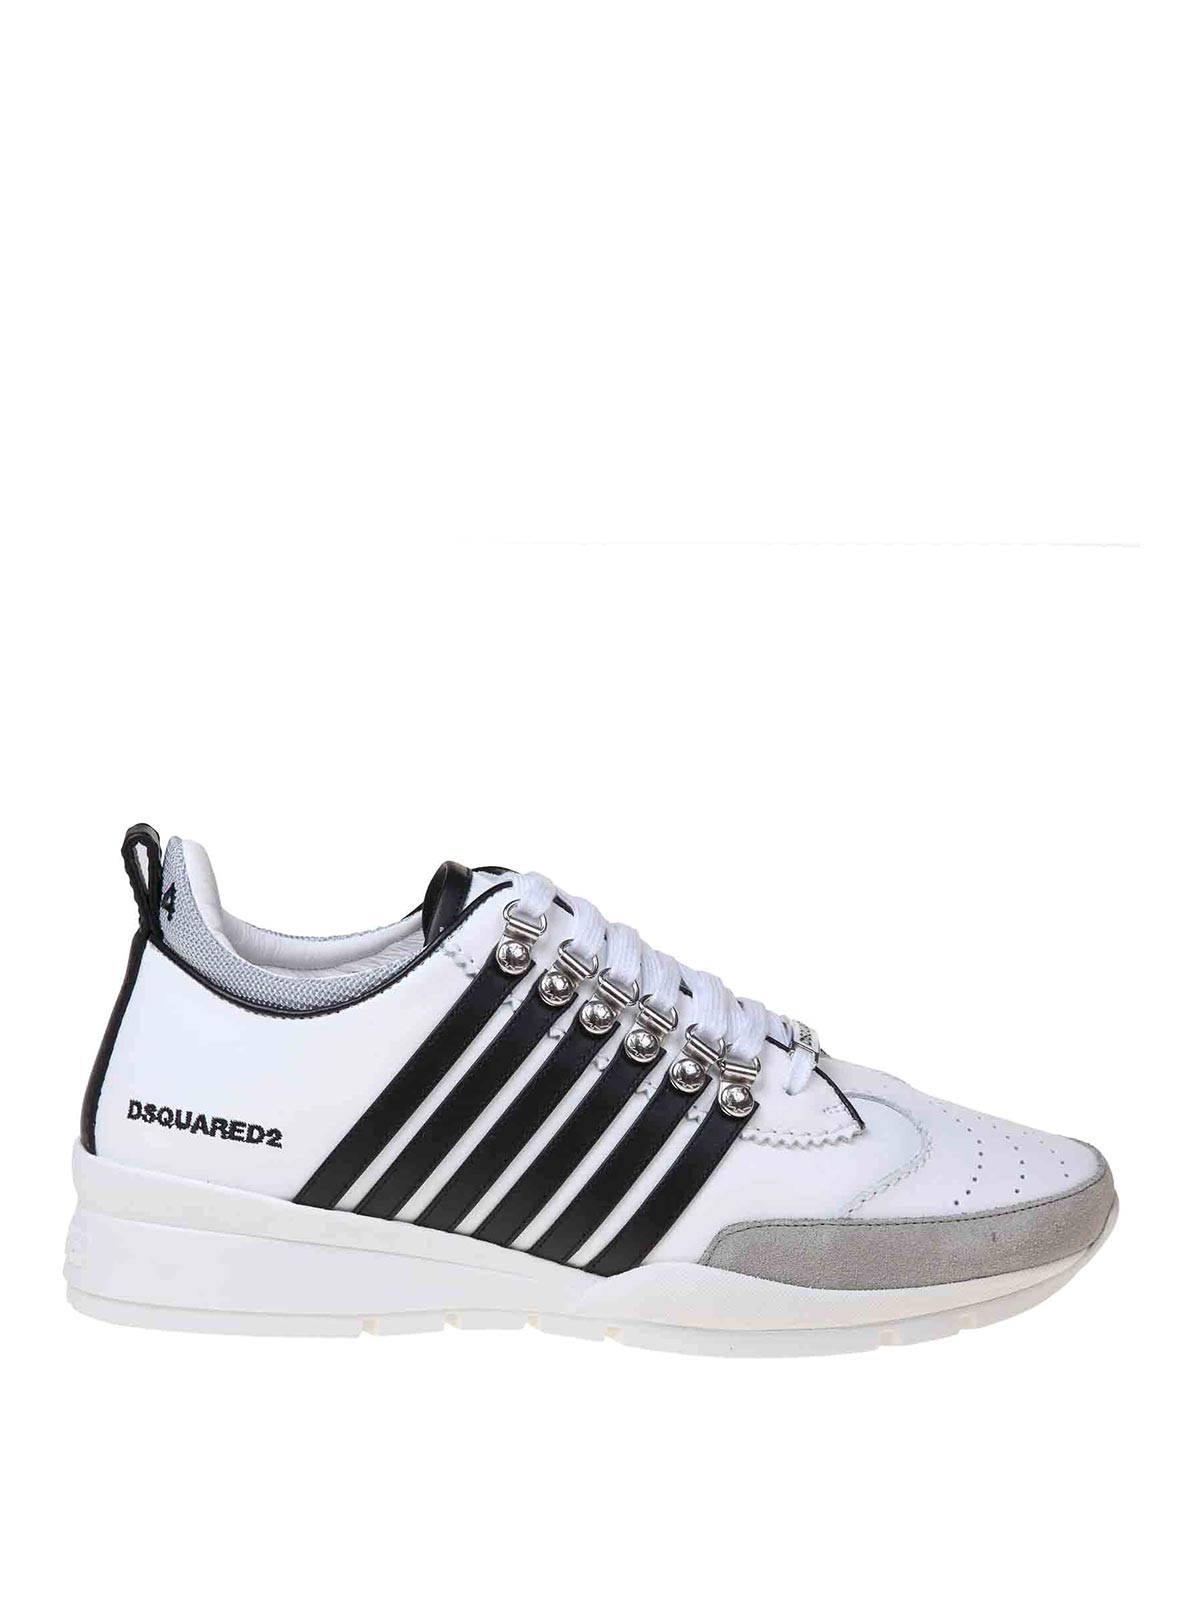 Shop Dsquared2 Legendary Sneakers In Black And White Leather